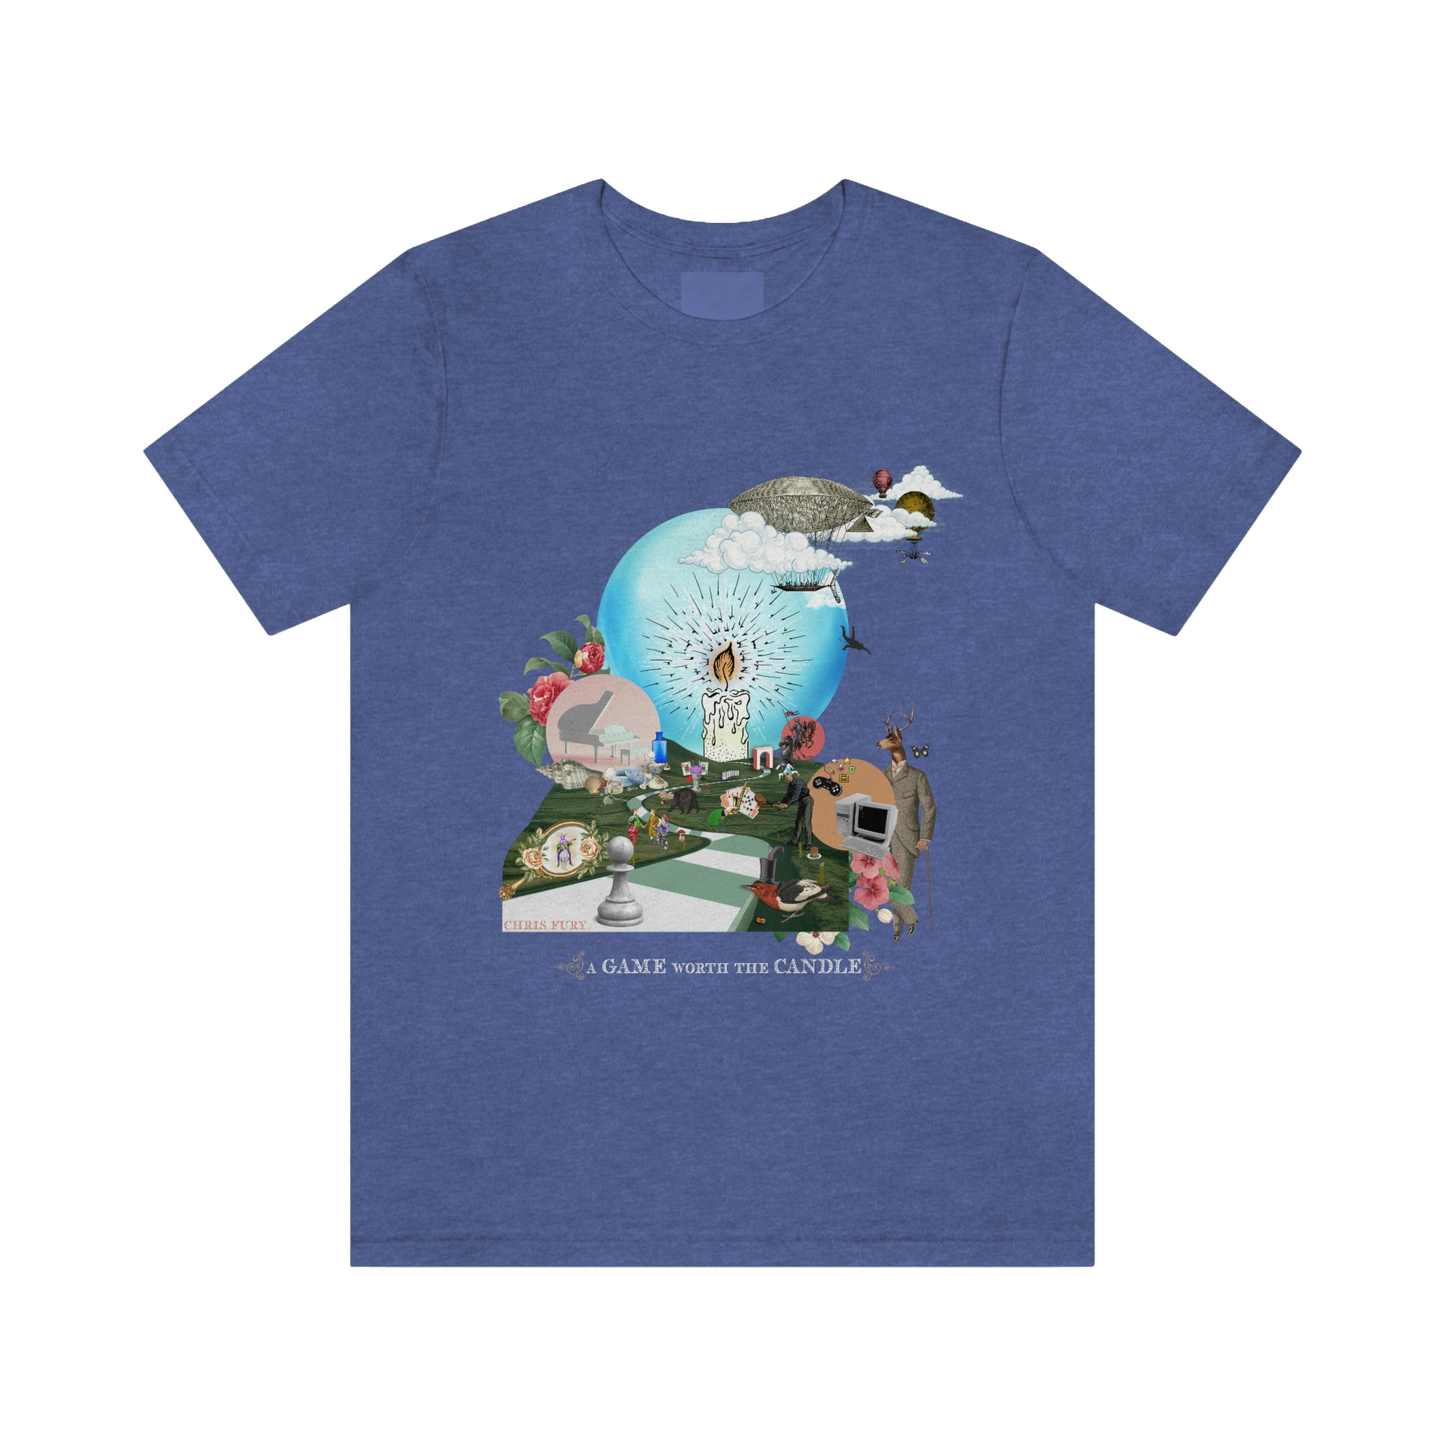 "A Game Worth the Candle" Album Artwork T-Shirt